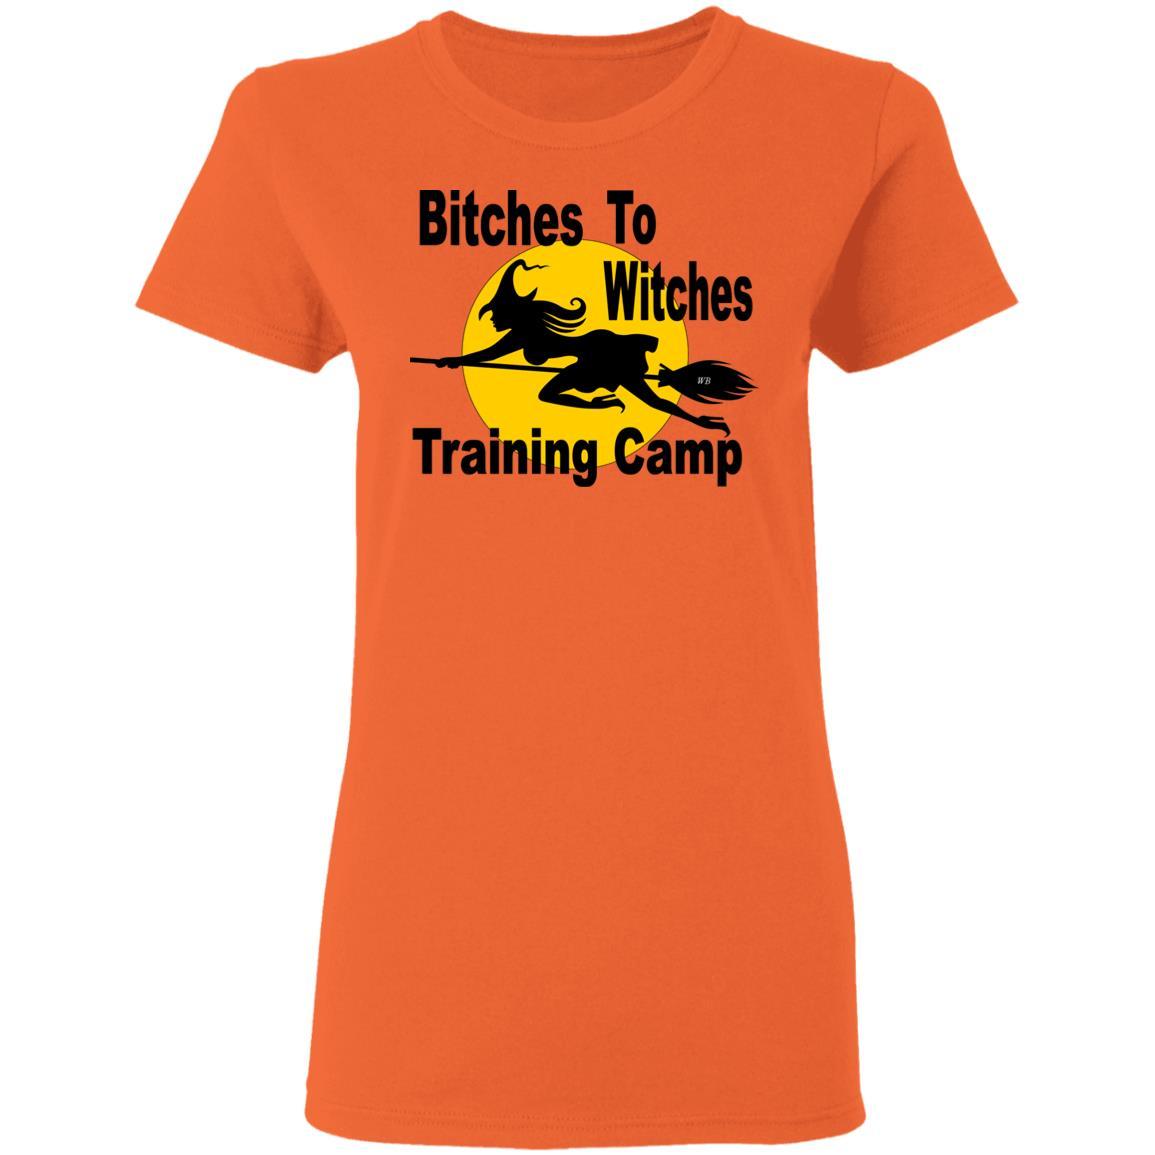 T-Shirts Orange / S WineyBitches.Co "Bitches To Witches Training Camp" Halloween Ladies' 5.3 oz. T-Shirt WineyBitchesCo